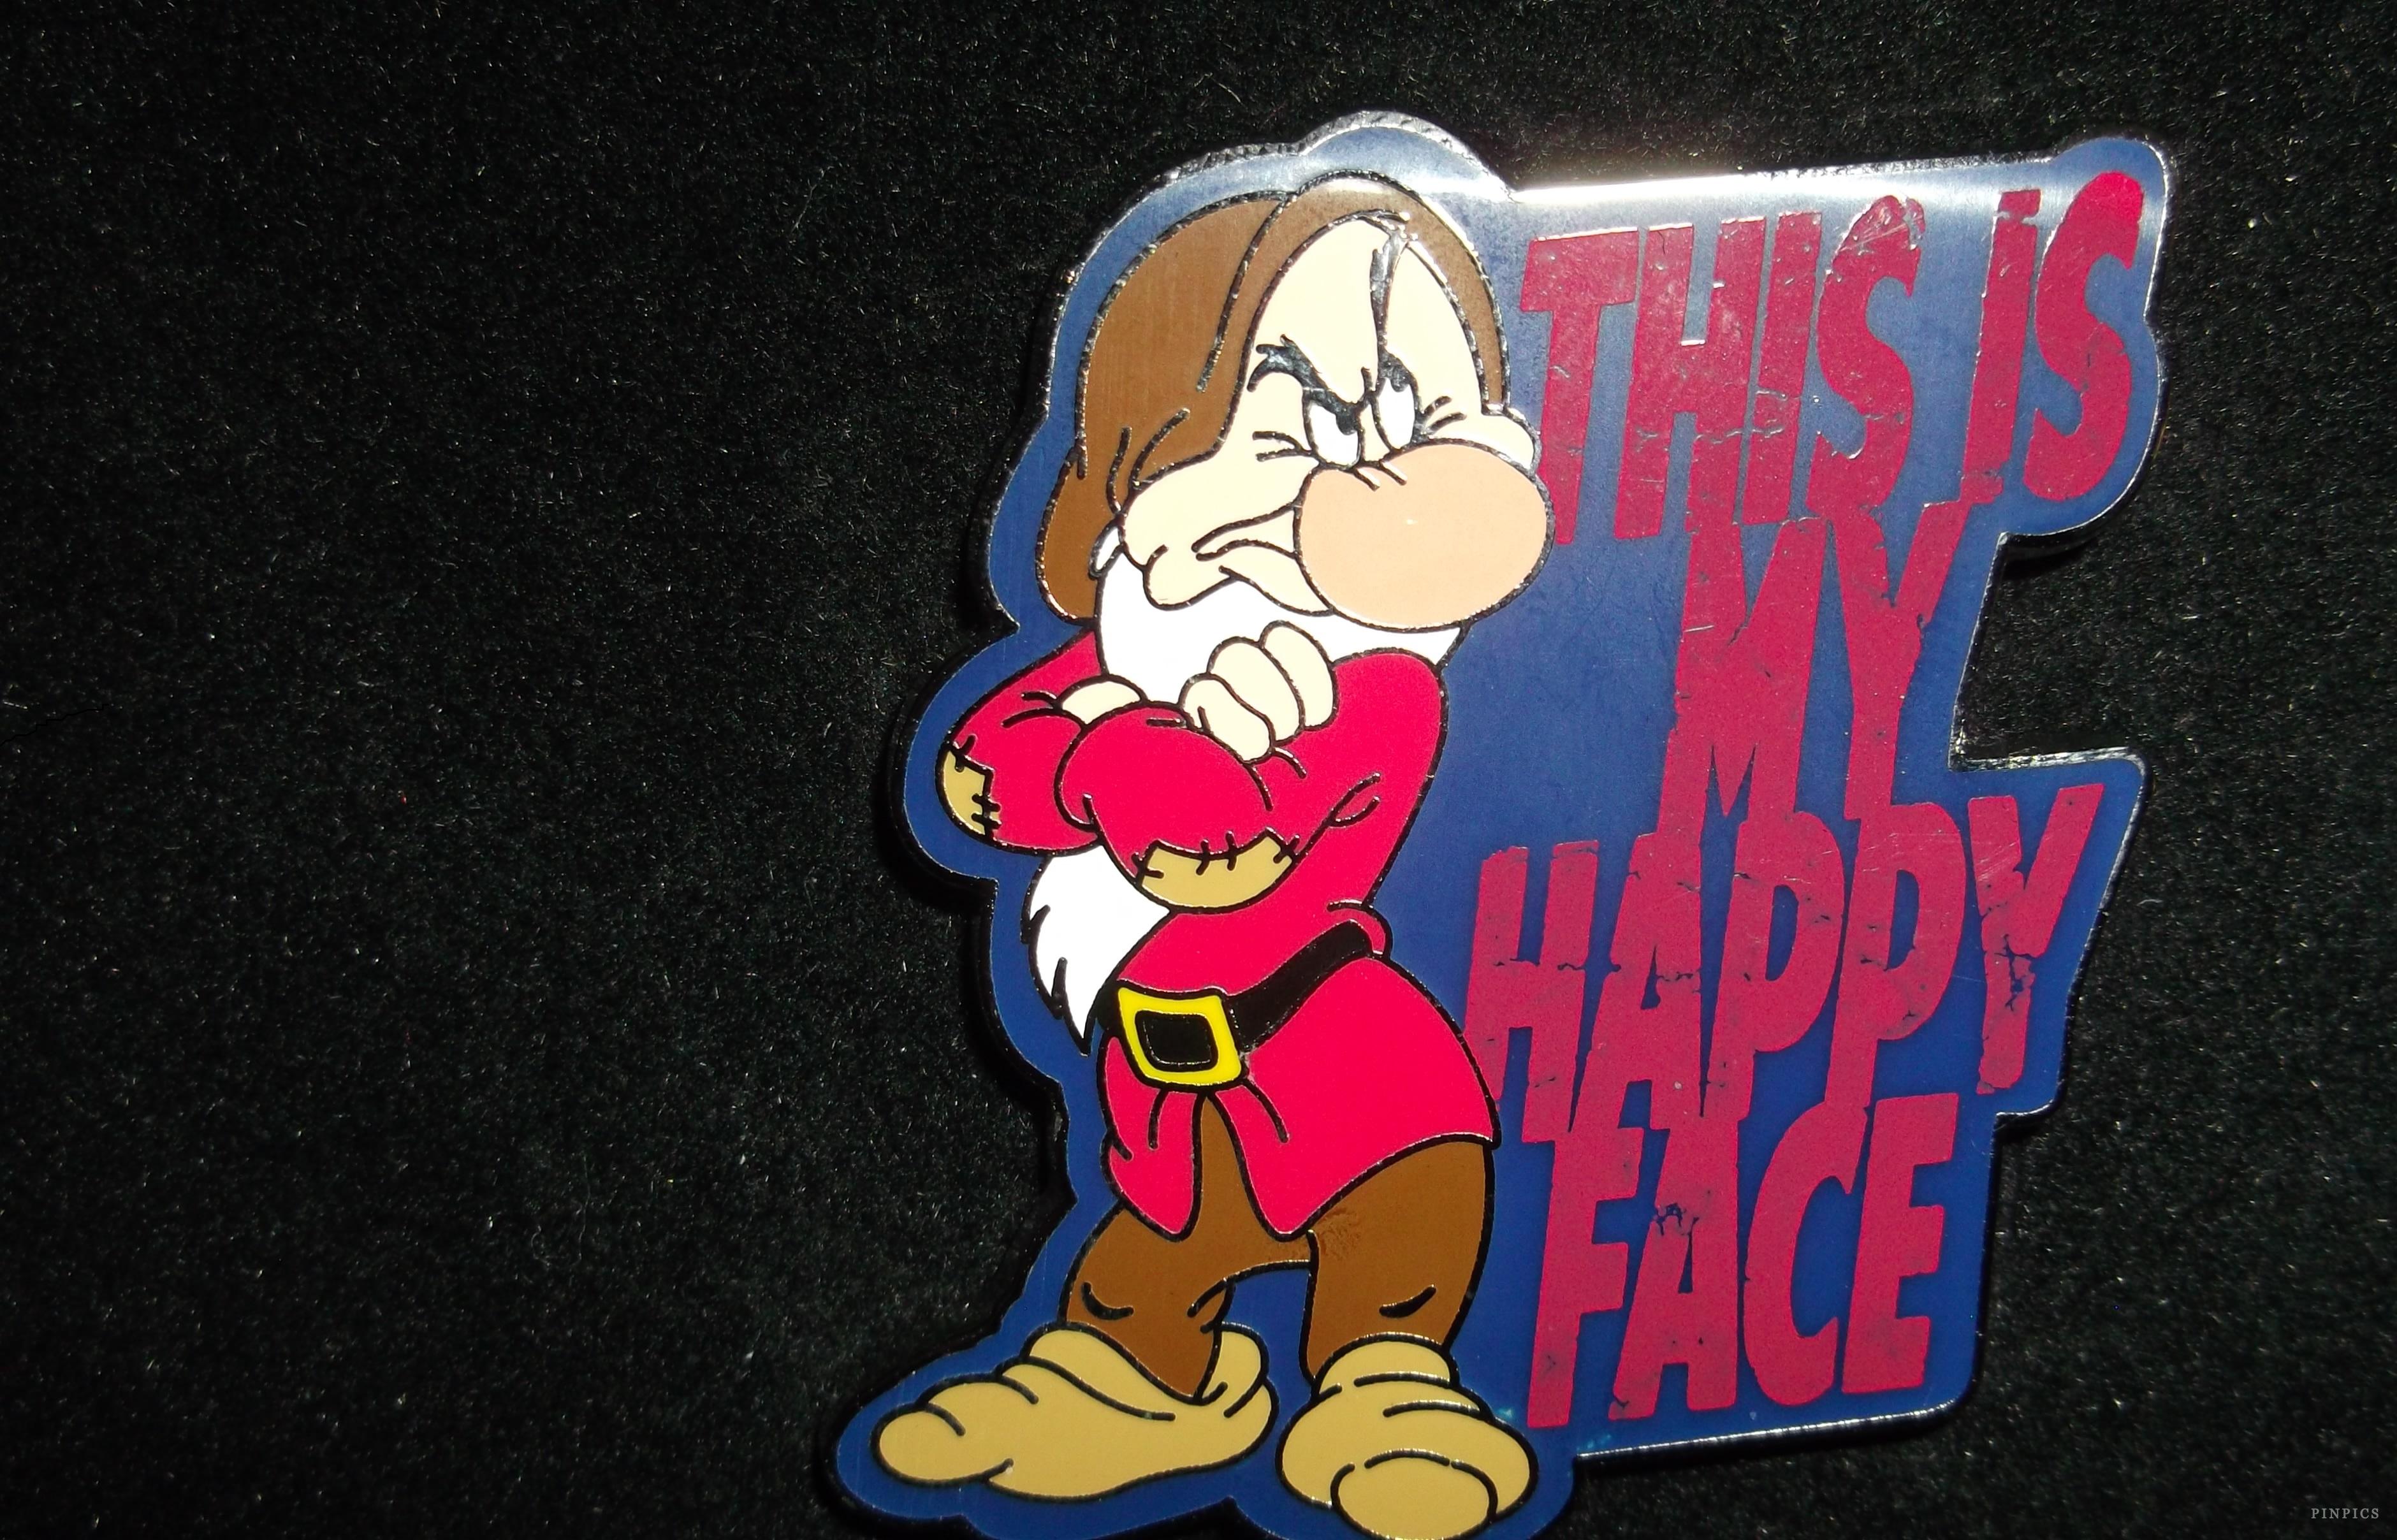 Grumpy – This is my Happy Face (Artist Proof)